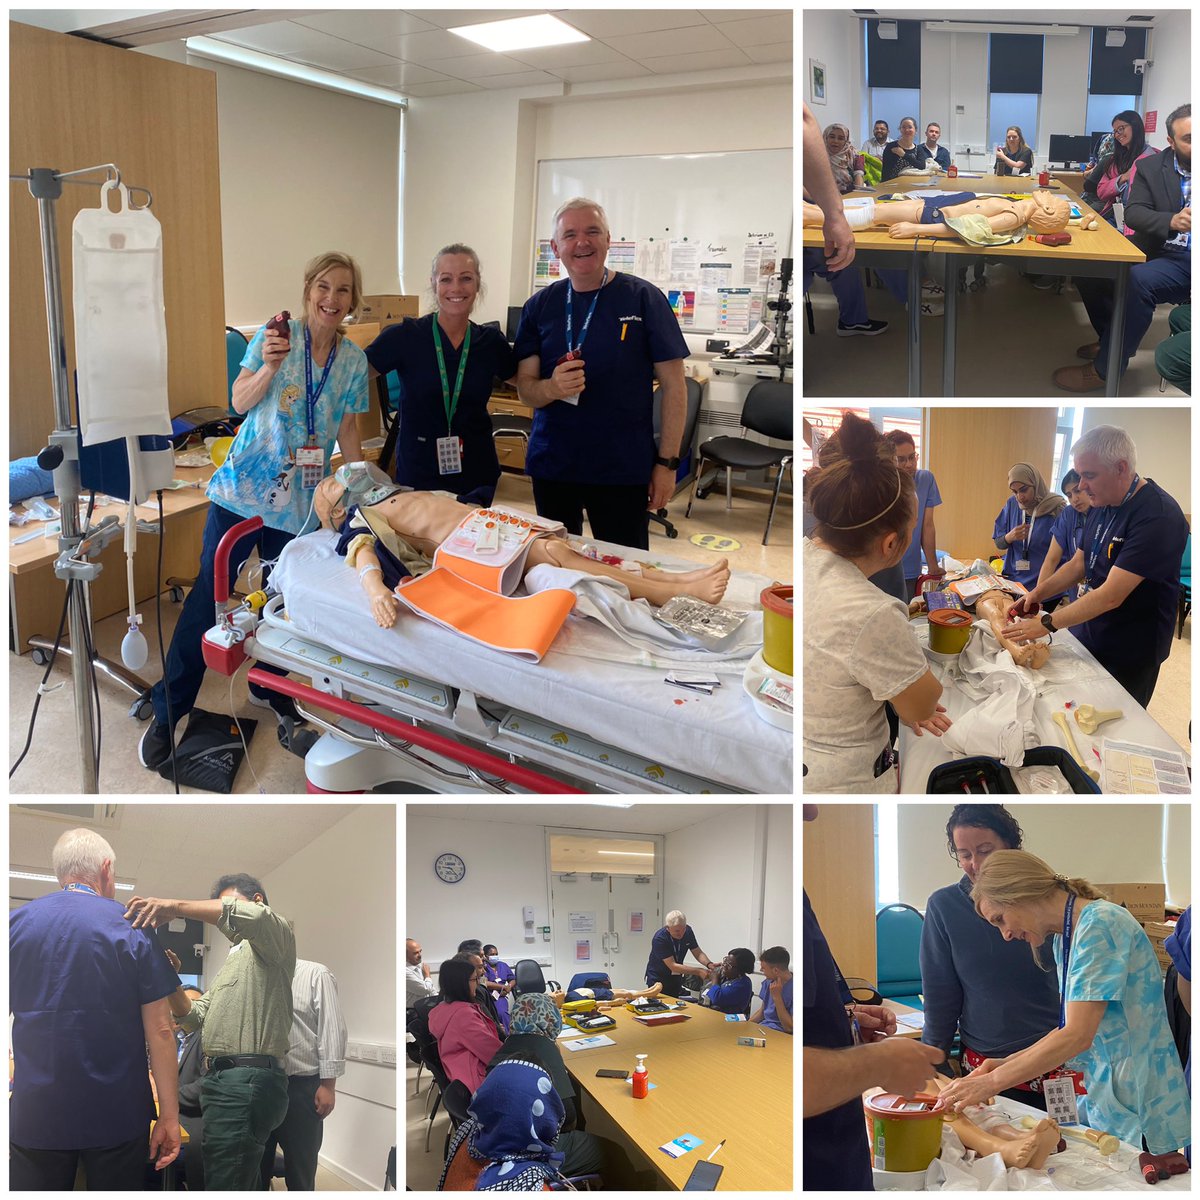 A special word of thanks for an excellent skills session from Noel Lynott (Teleflex manager) on EZIO, pelvic binders & QuikClot for our paediatric patients. This was followed by a paediatric major trauma sim by our excellent SPR Dr. Kalid. #edolol